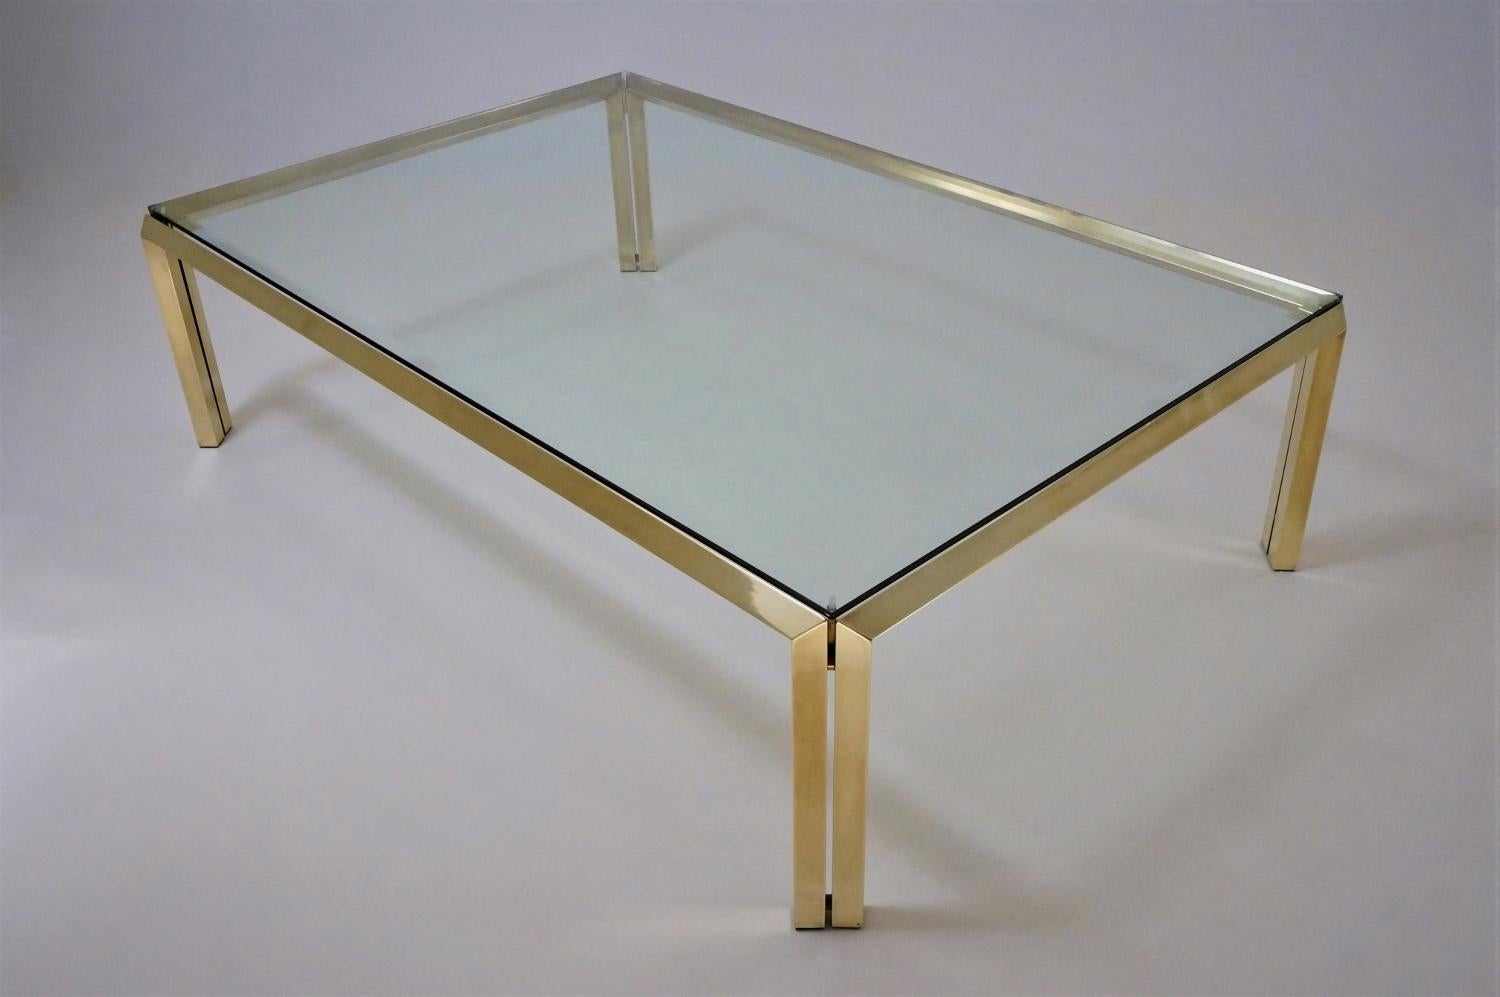 Maison Charles by Philippe Parent (attributed), large brass coffee table, 1970s, French.

This coffee table has been gently cleaned while respecting the vintage patina. It is ready to use.

This vintage coffee table, with its minimalist design,